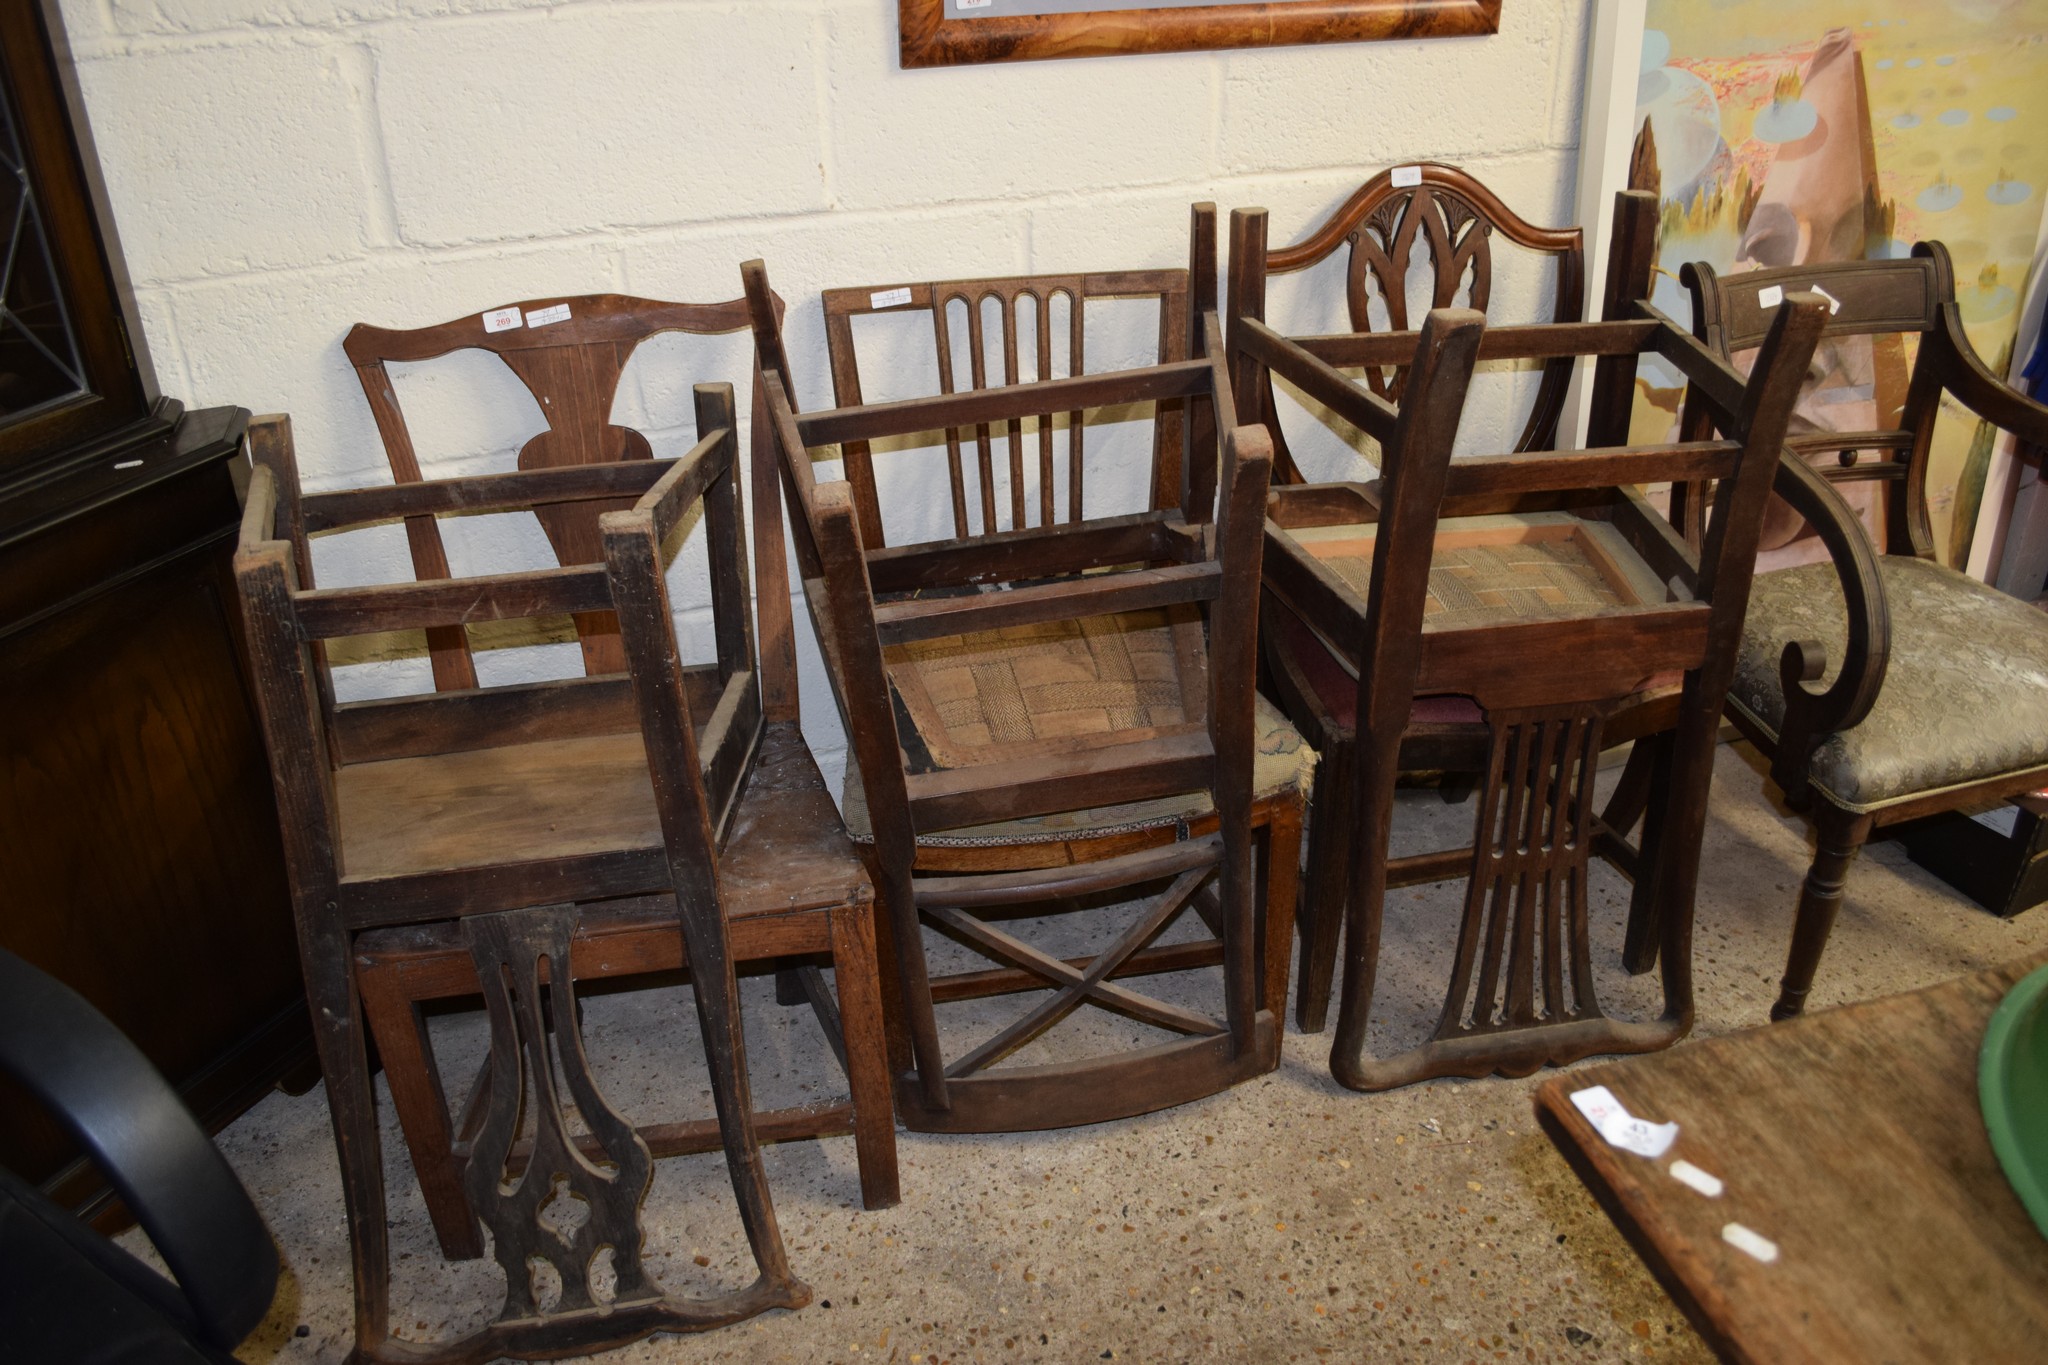 COLLECTION OF SEVEN 18TH AND 19TH CENTURY DINING CHAIRS INCLUDING ONE REGENCY CARVER CHAIR